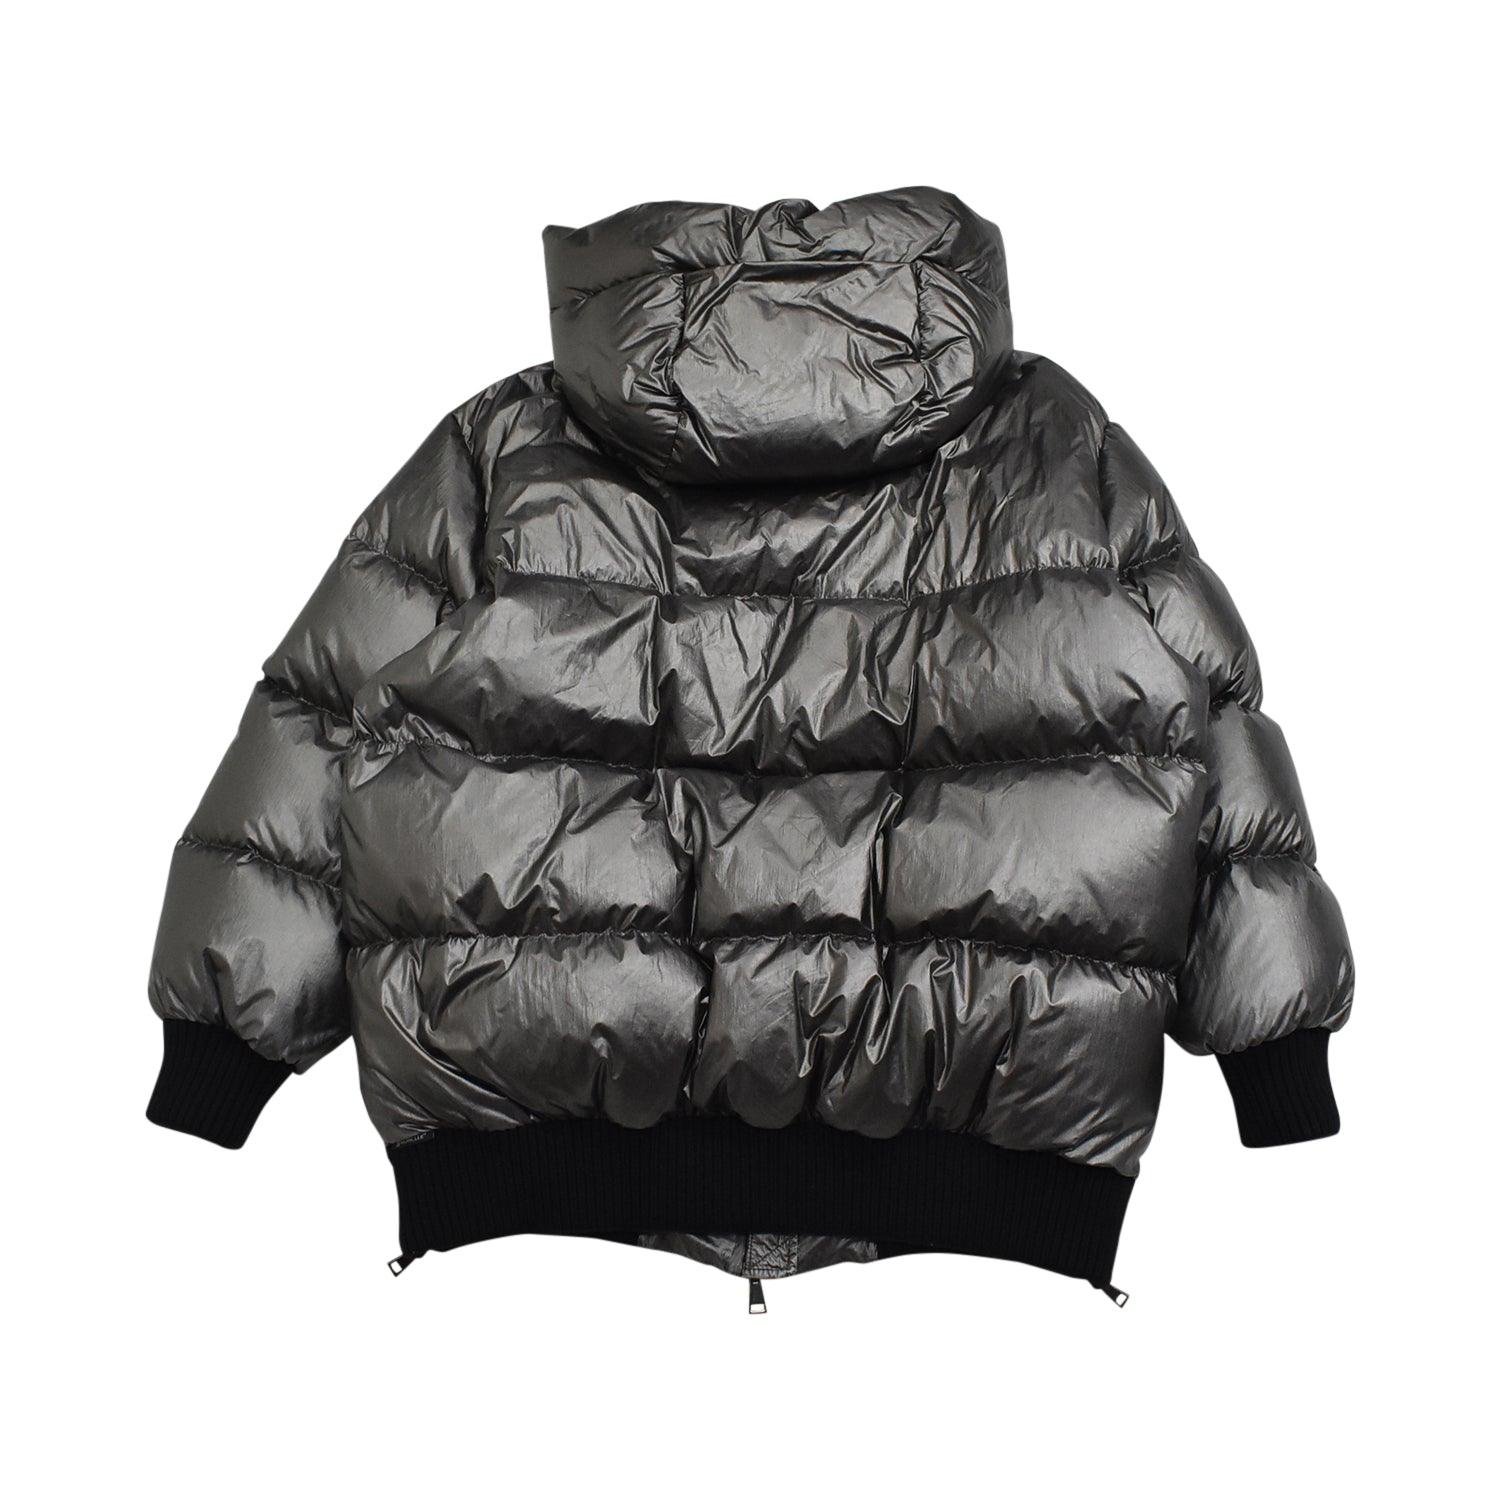 Moncler 'Verdier' Puffer Jacket - Women's 0 - Fashionably Yours